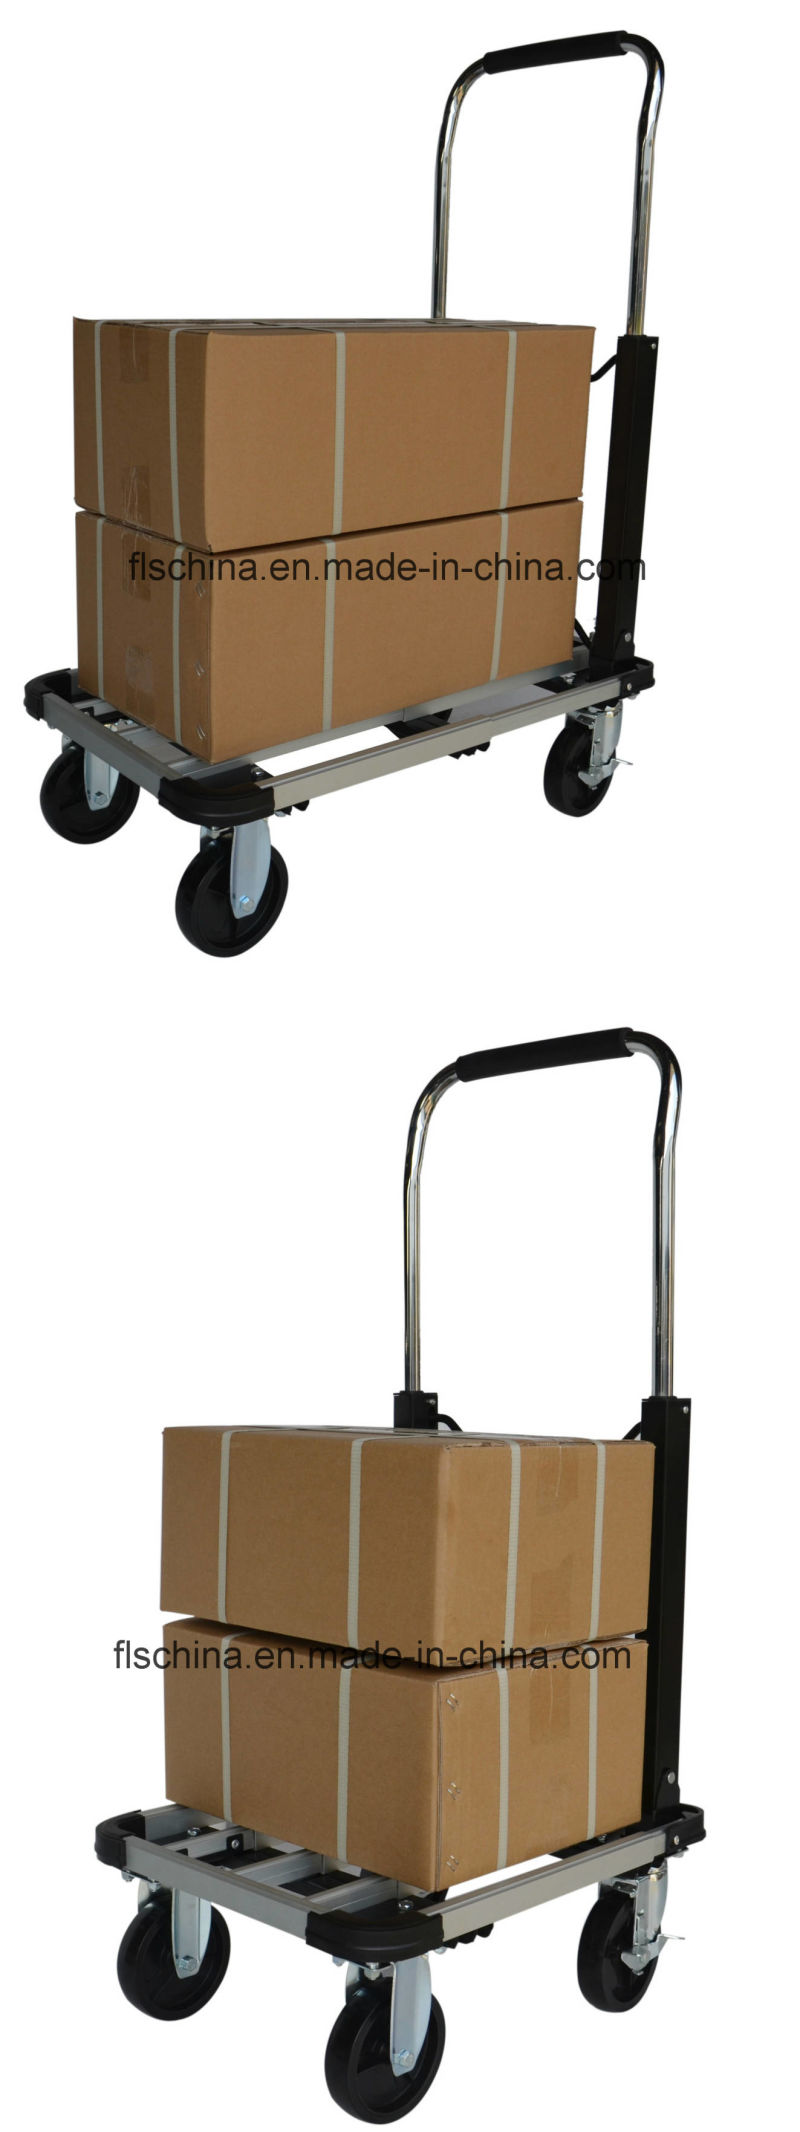 Foldable, Mute, High Quality, Aluminium Alloy Hand Truck 150kgs Payload